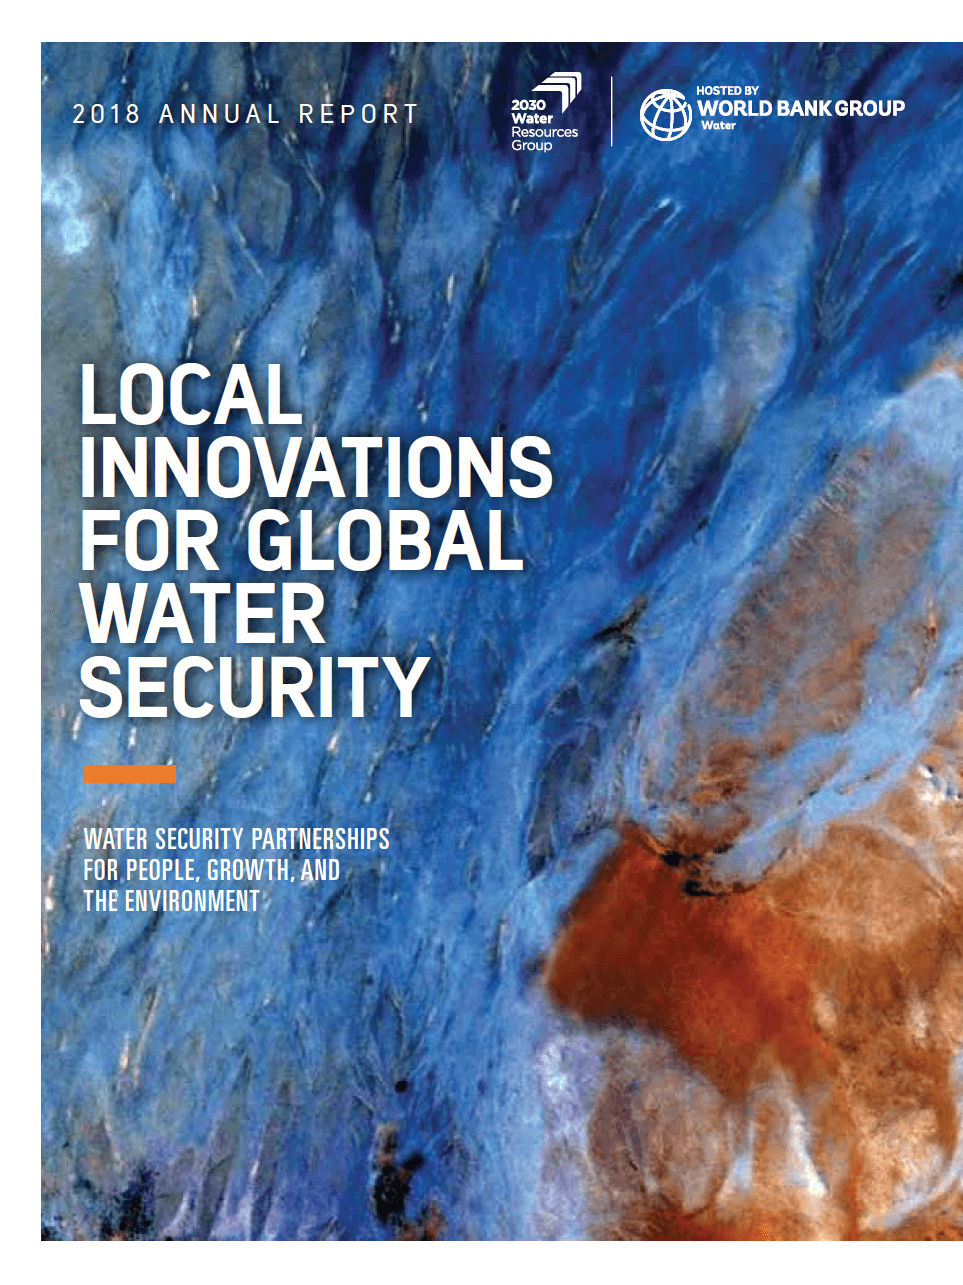 2018 Annual Report: Local Innovations for Global Water Security